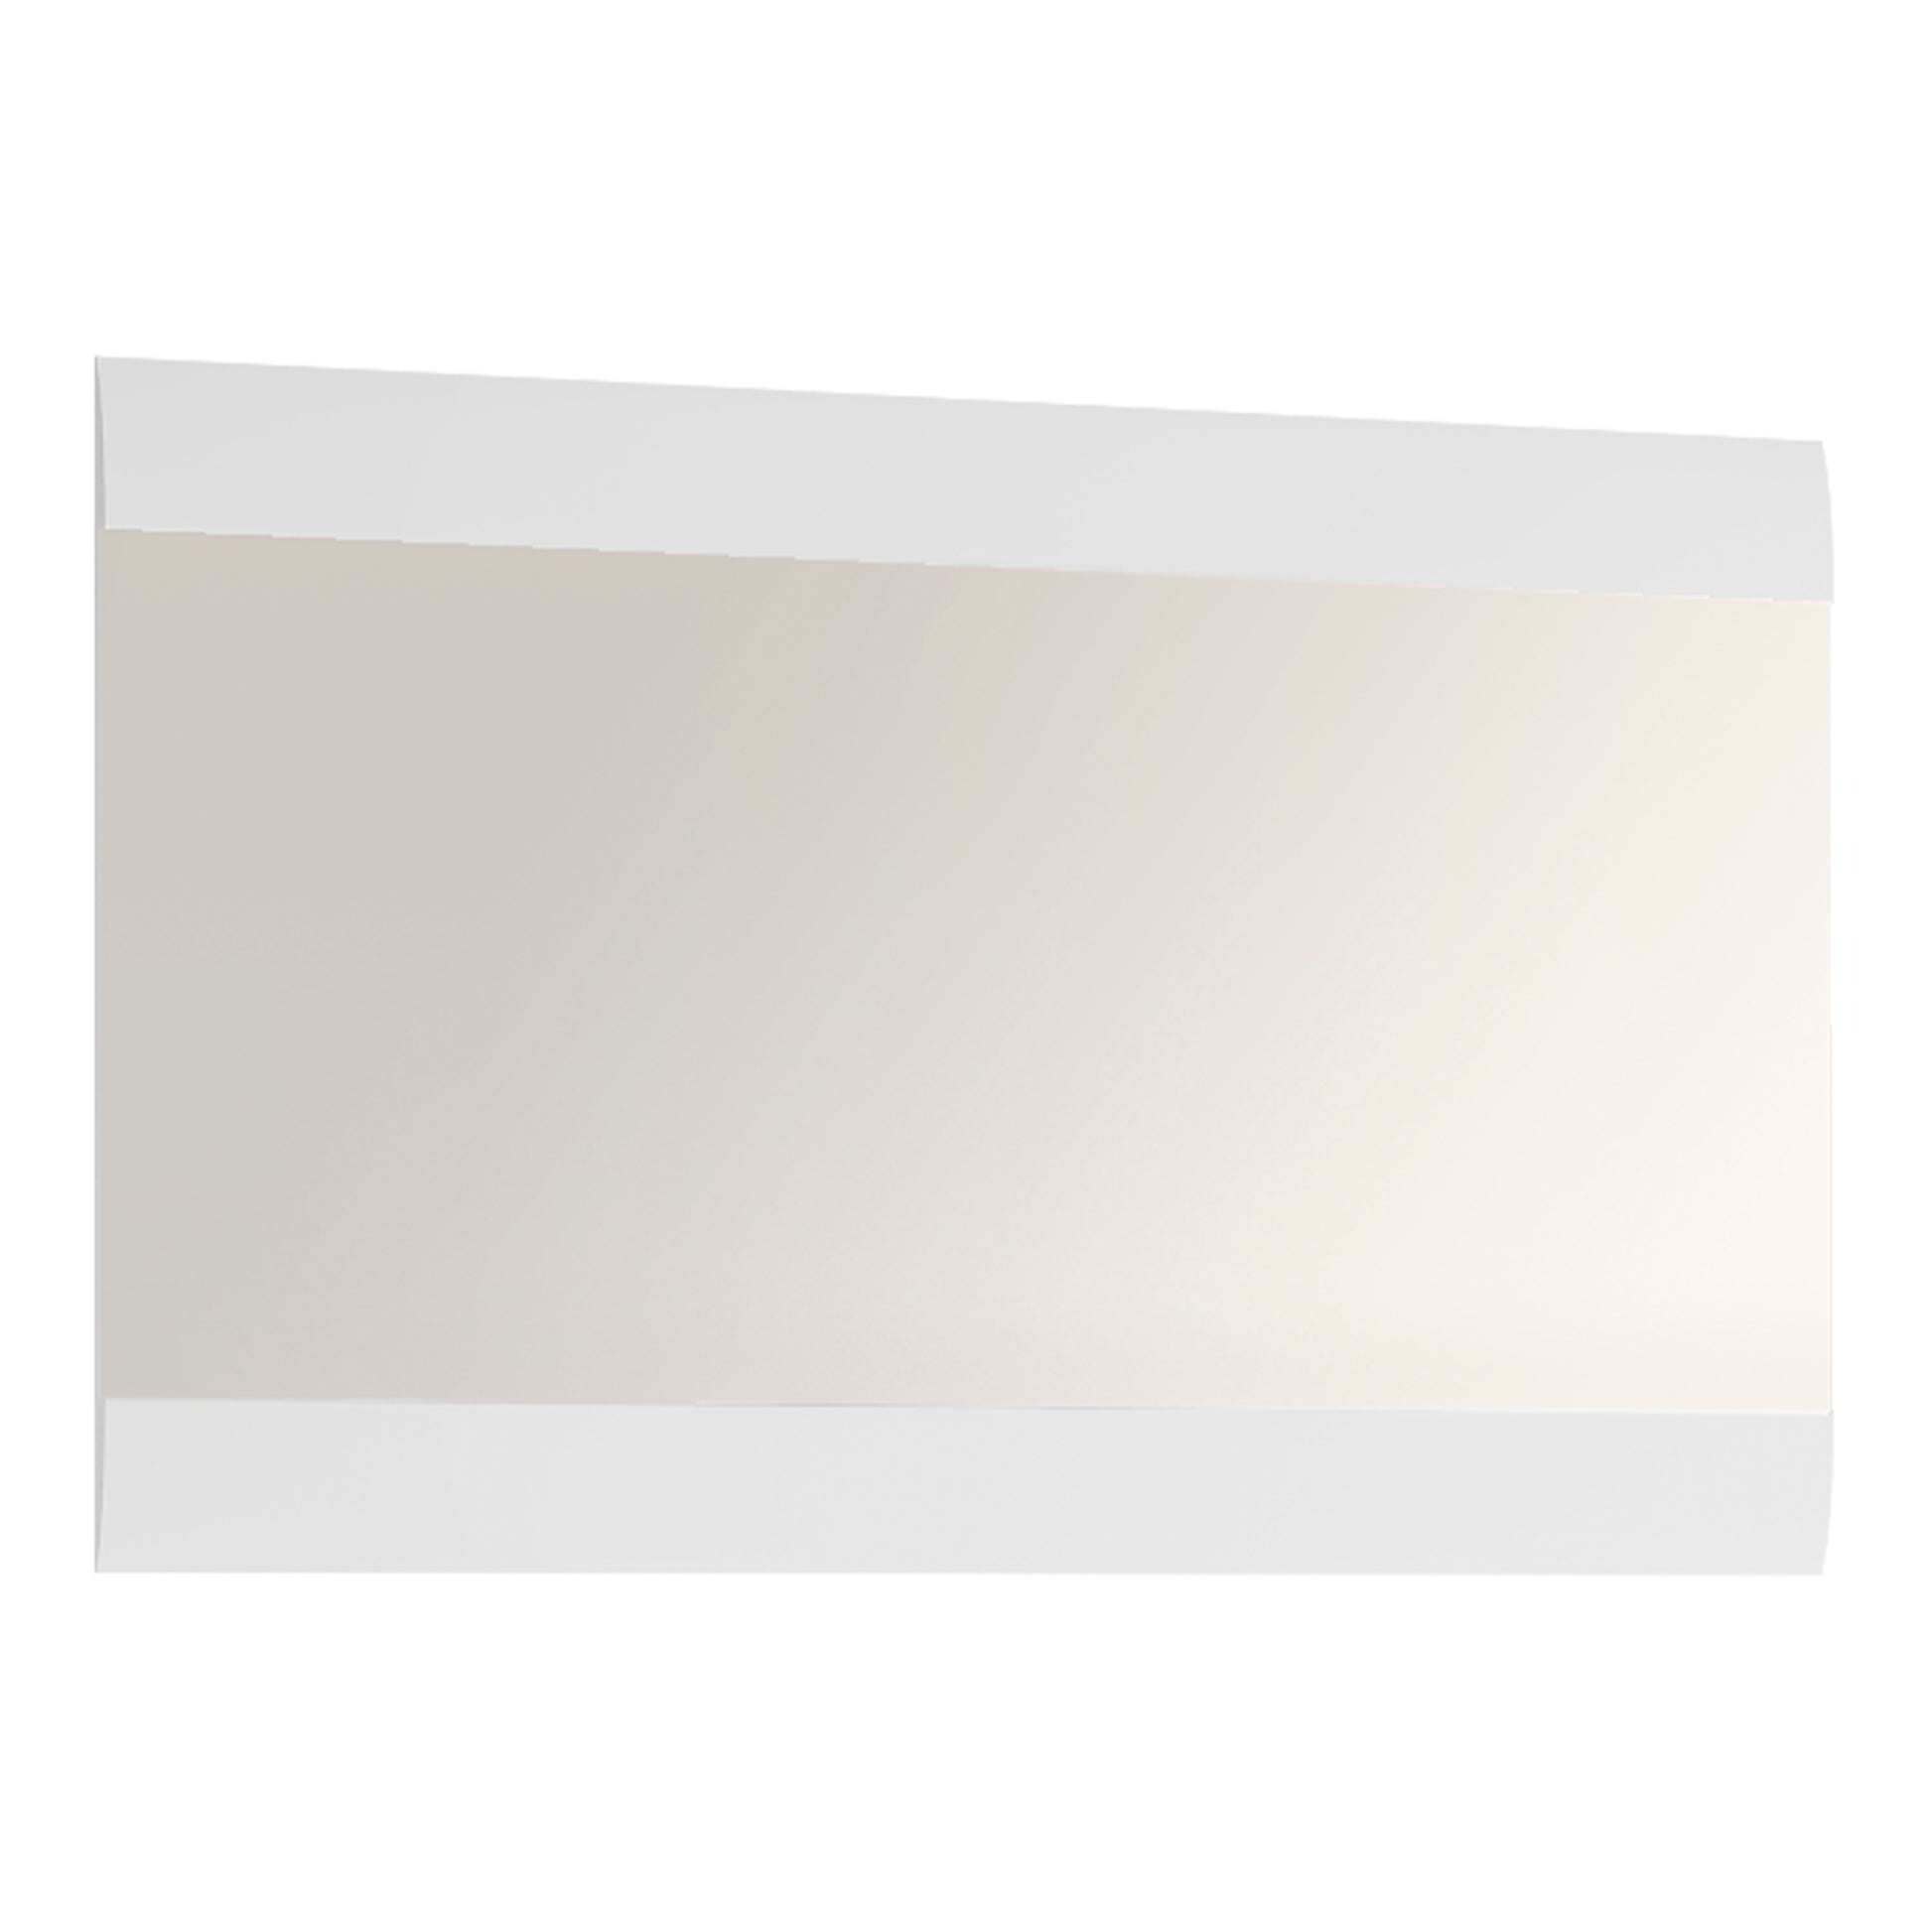 Chelsea  Wall Mirror 109.5 cm wide in White with Oak Trim